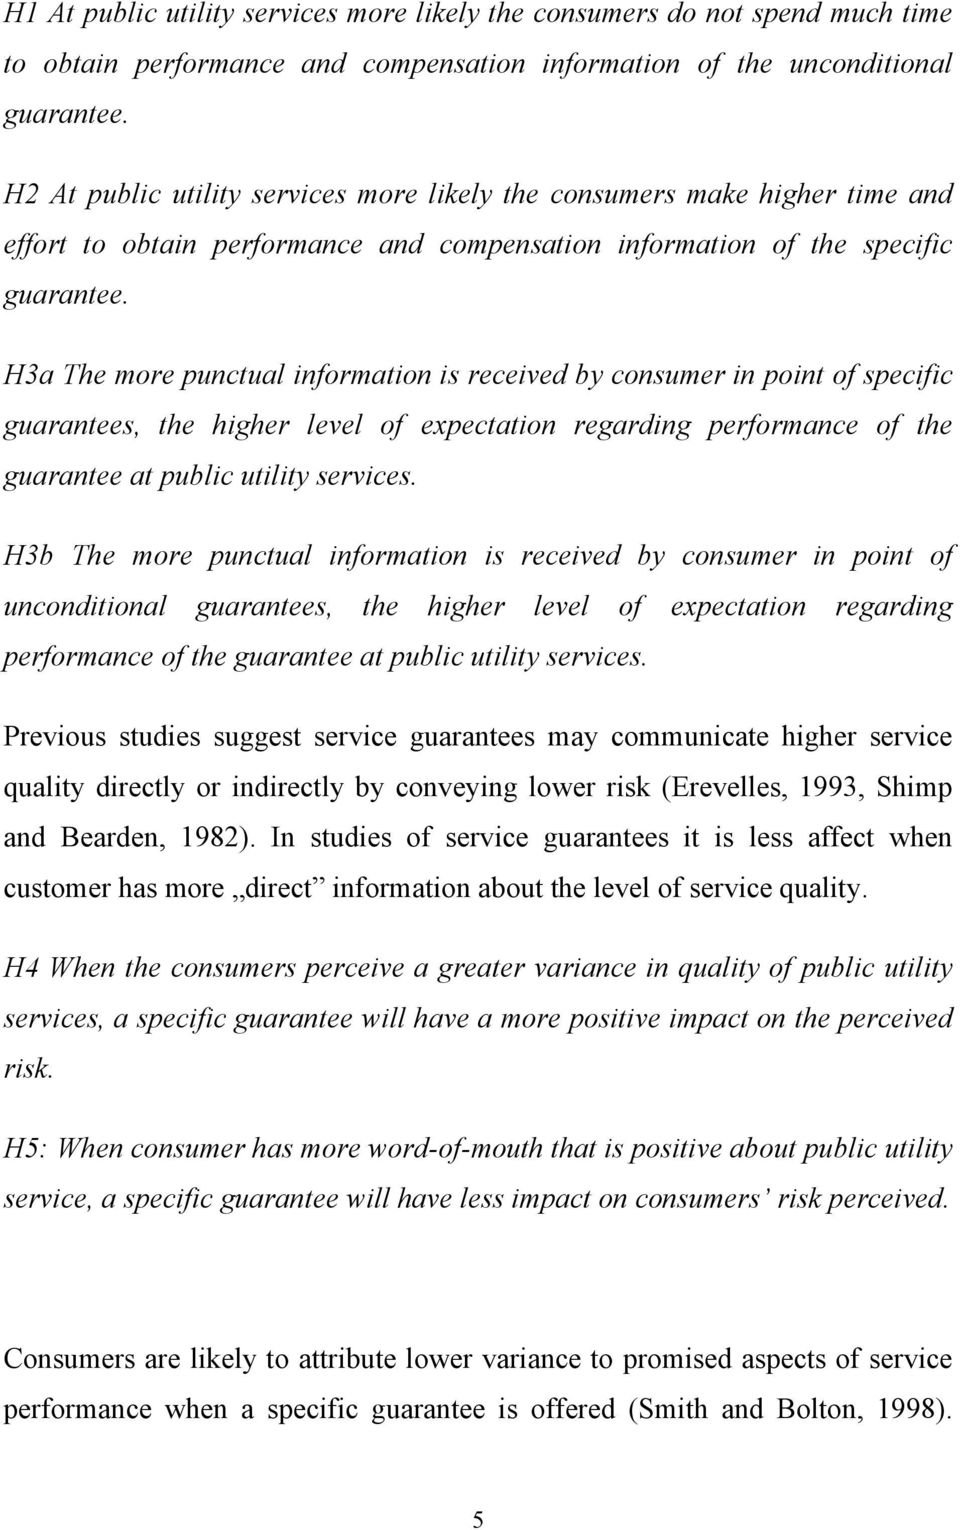 H3a The more punctual information is received by consumer in point of specific guarantees, the higher level of expectation regarding performance of the guarantee at public utility services.